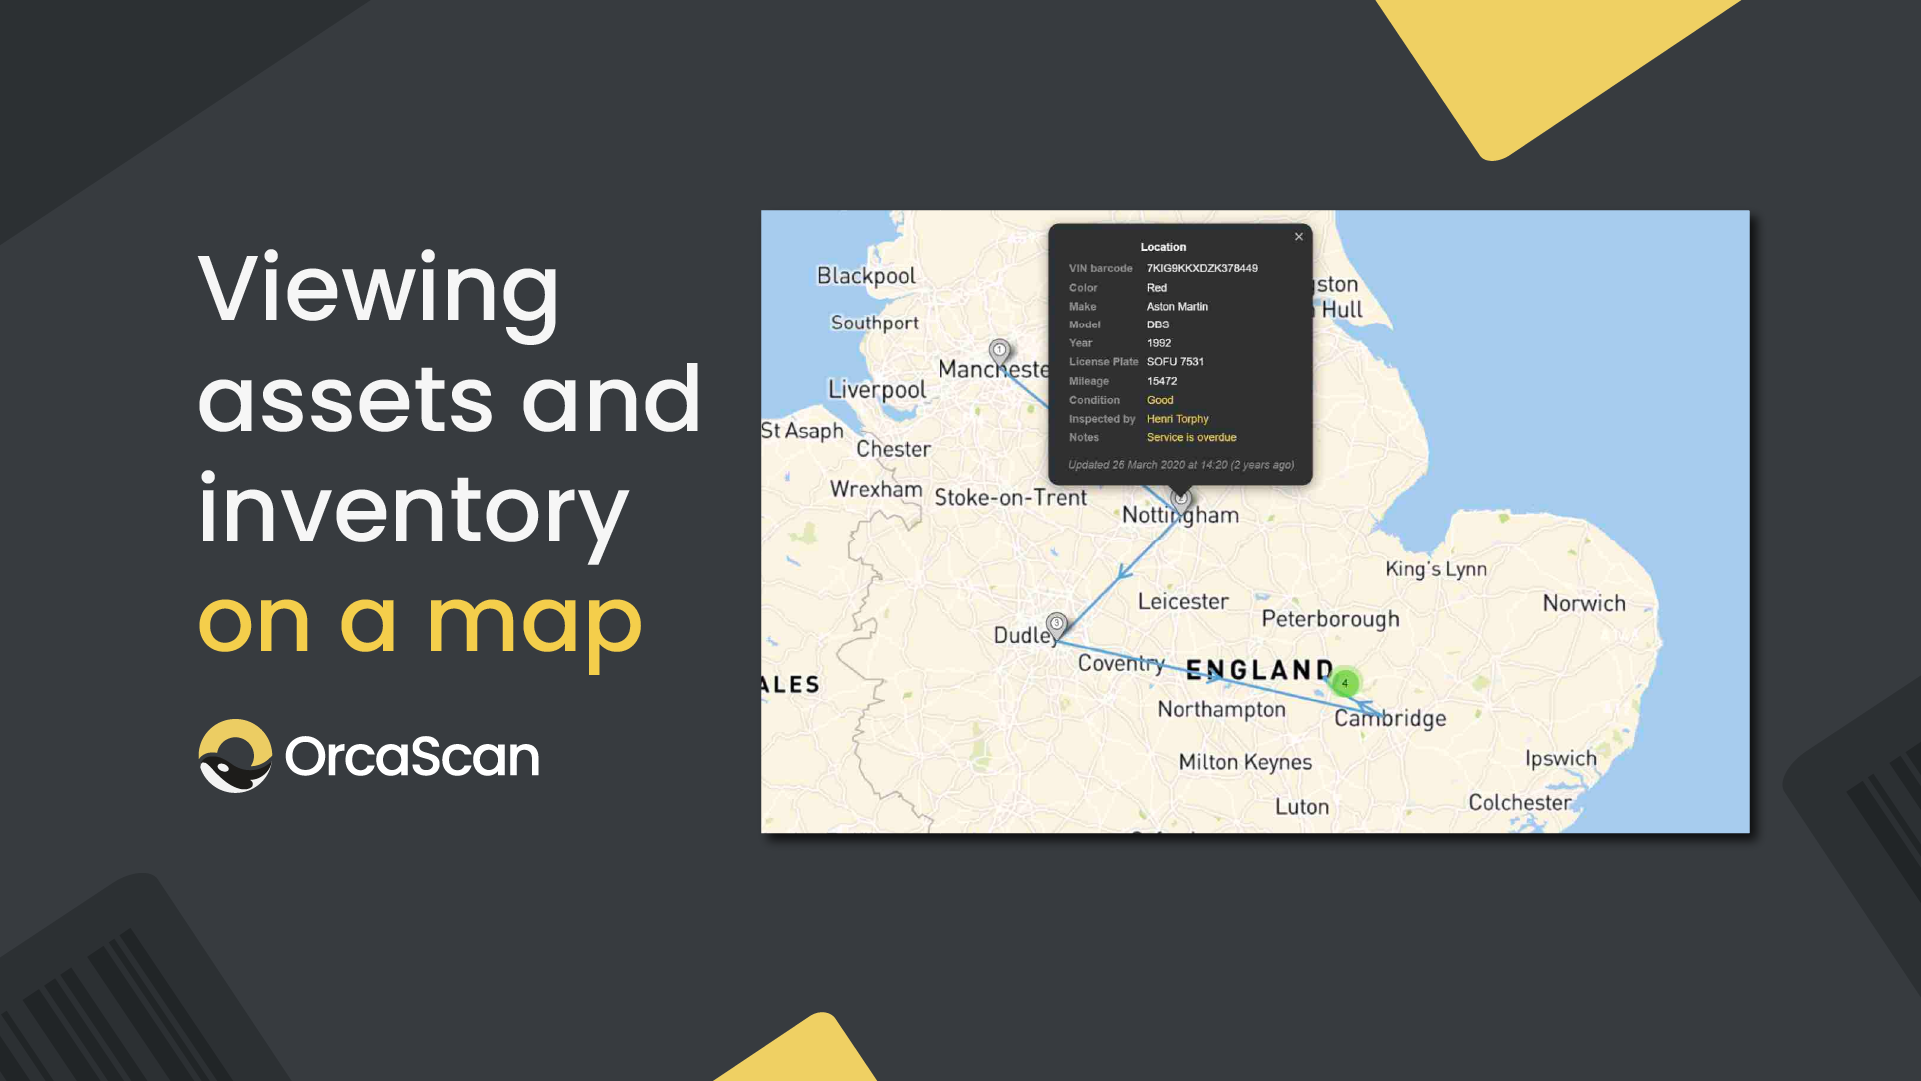 How to view assets and inventory on a map